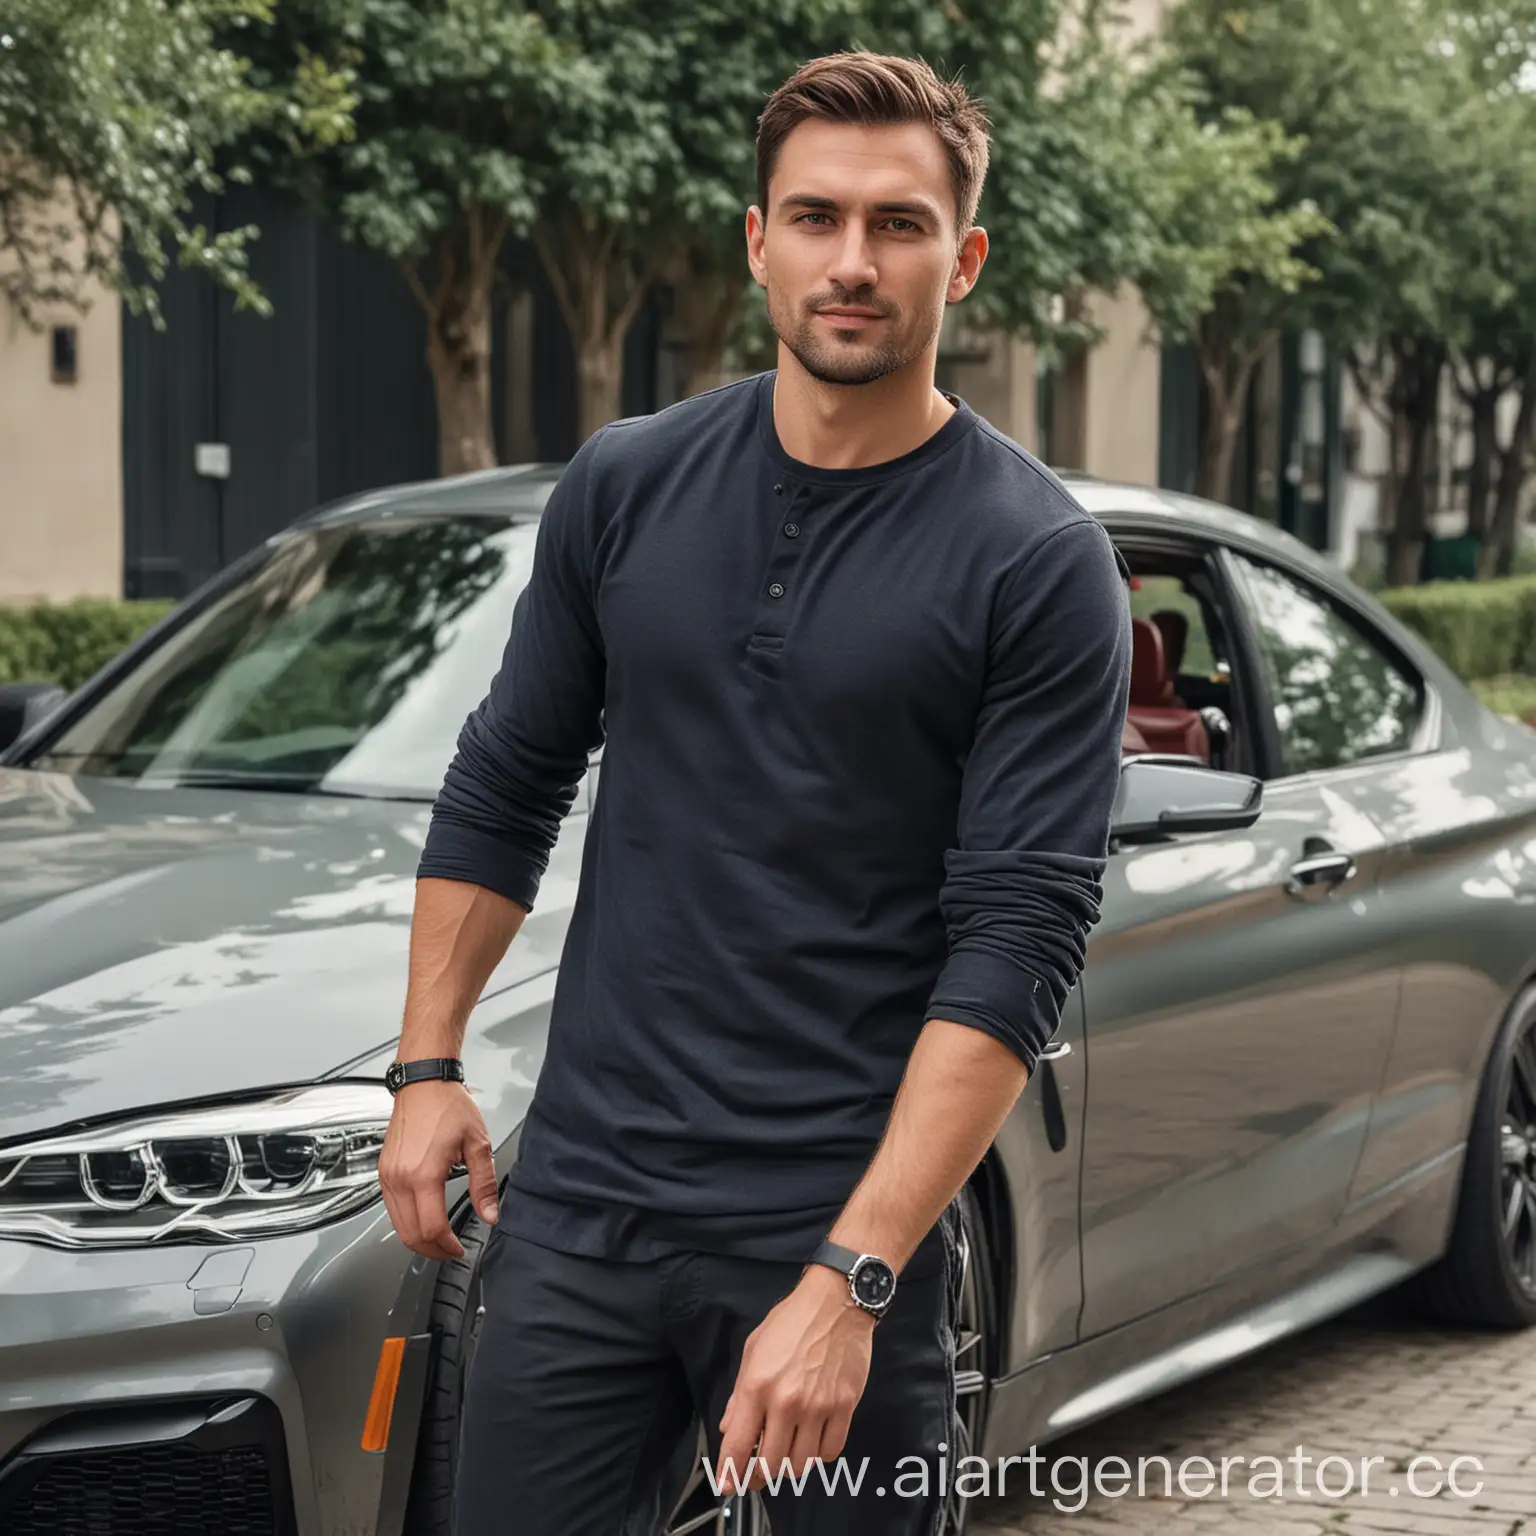 Stylish-30YearOld-Man-with-Athletic-Build-Driving-a-BMW-Car